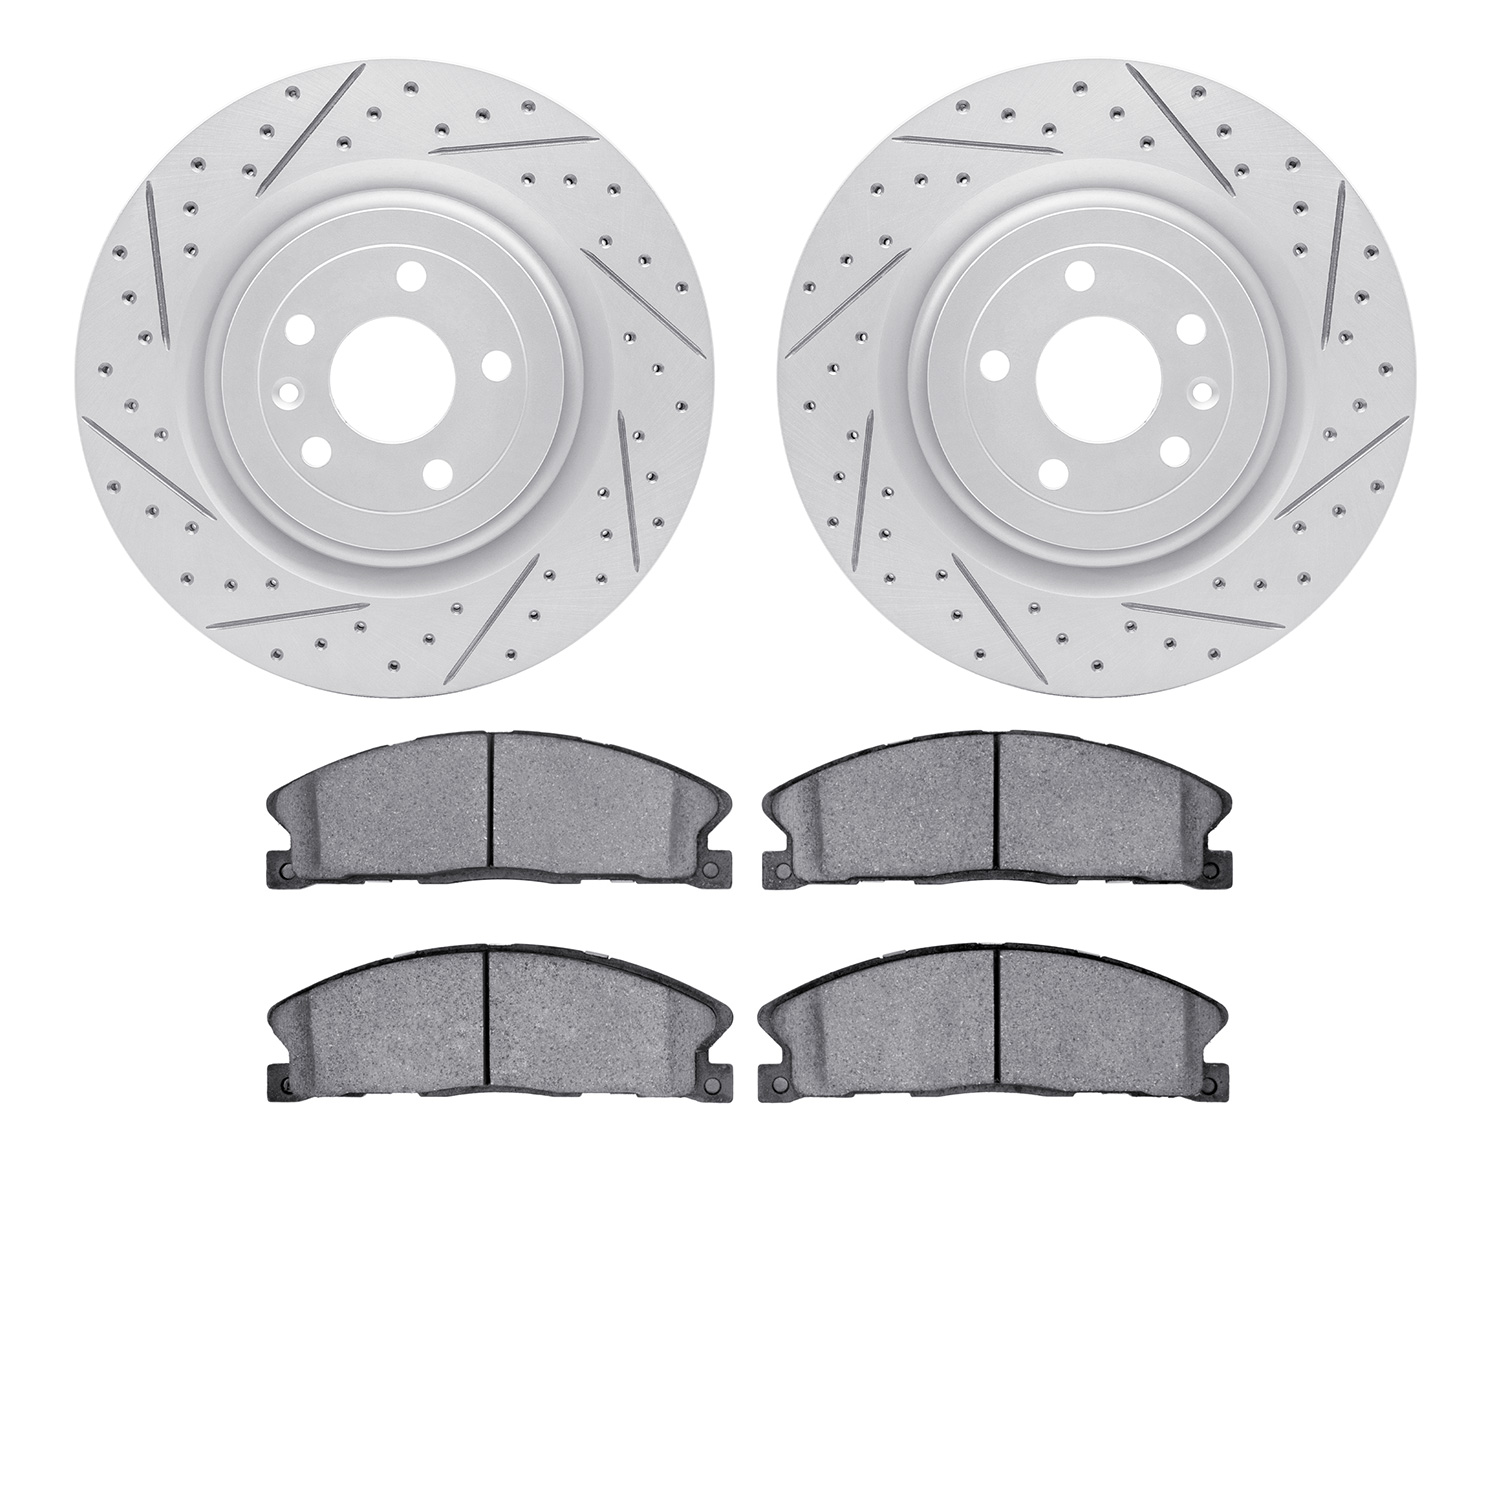 2502-54247 Geoperformance Drilled/Slotted Rotors w/5000 Advanced Brake Pads Kit, 2013-2019 Ford/Lincoln/Mercury/Mazda, Position: